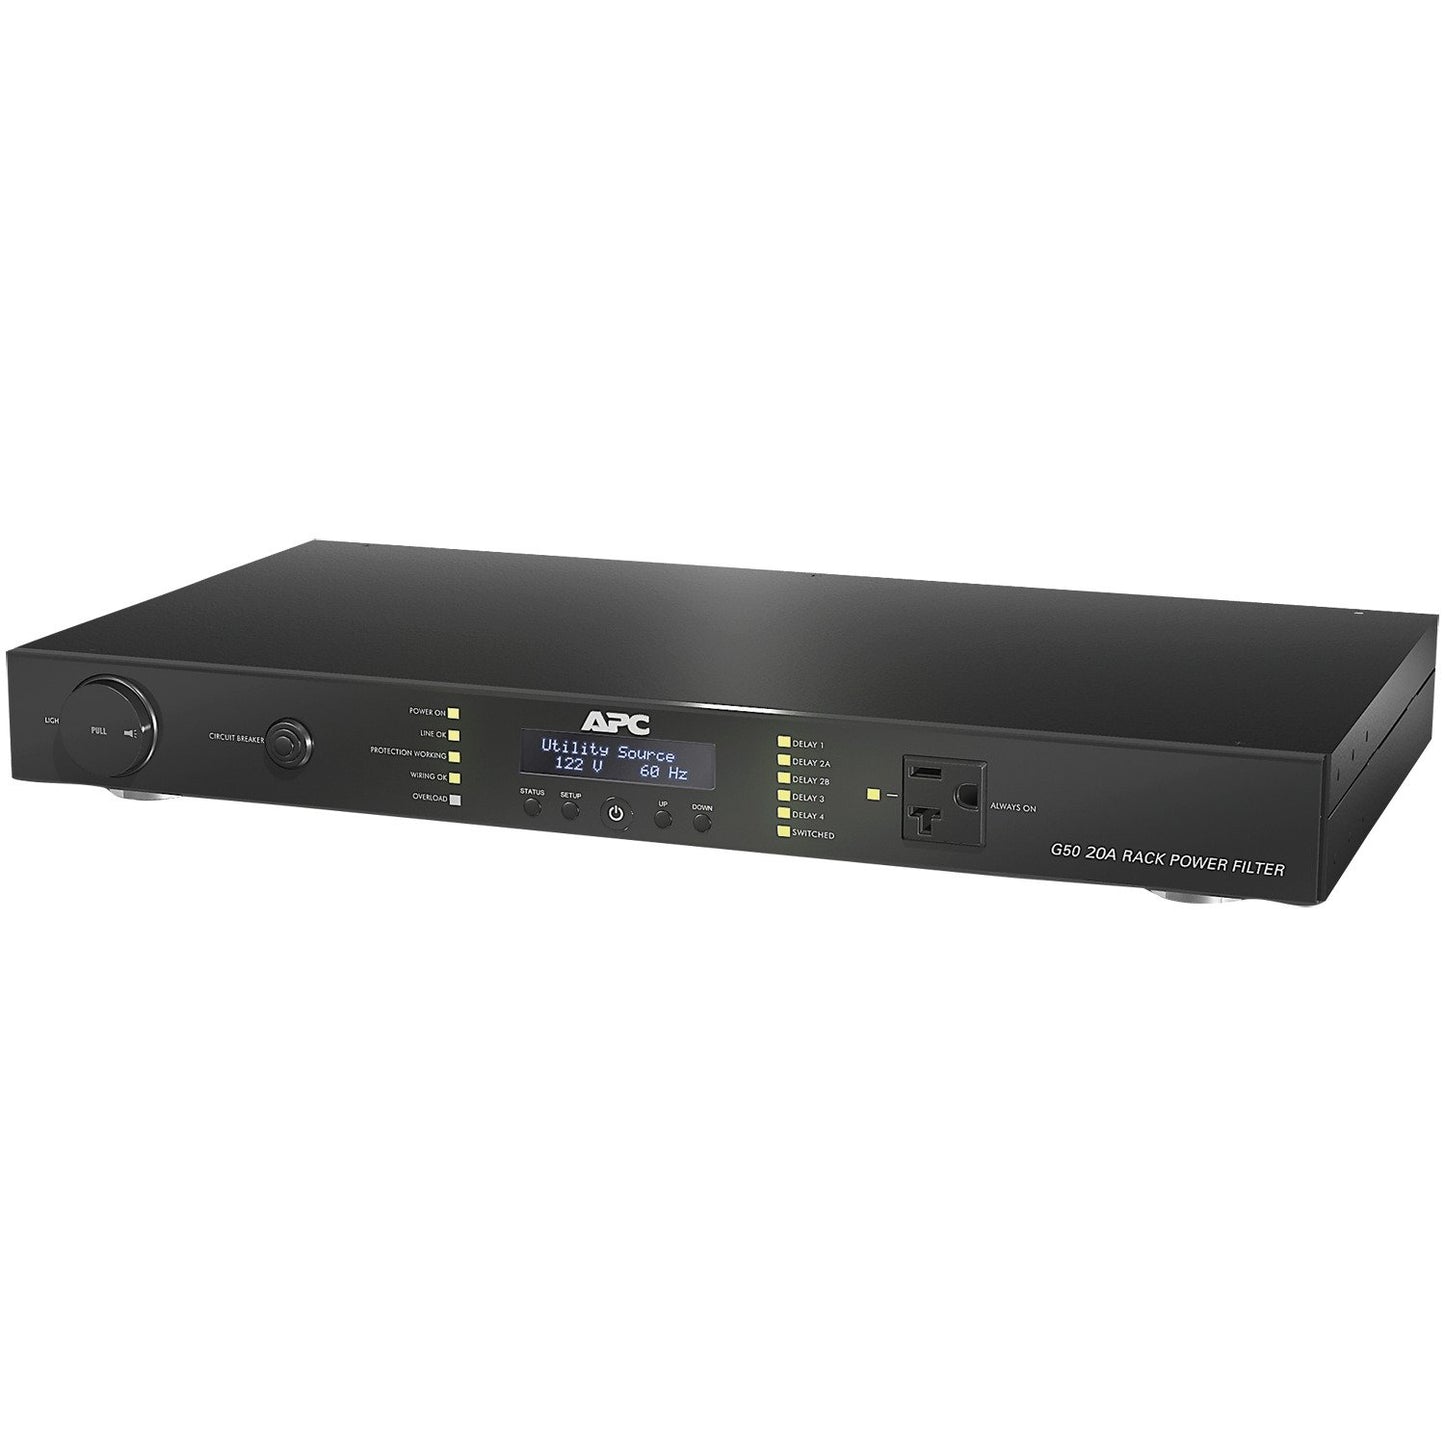 APC G50B-20A2 9-Outlet G-Type 20A Rack-Mount Energy-Saving Power Conditioner